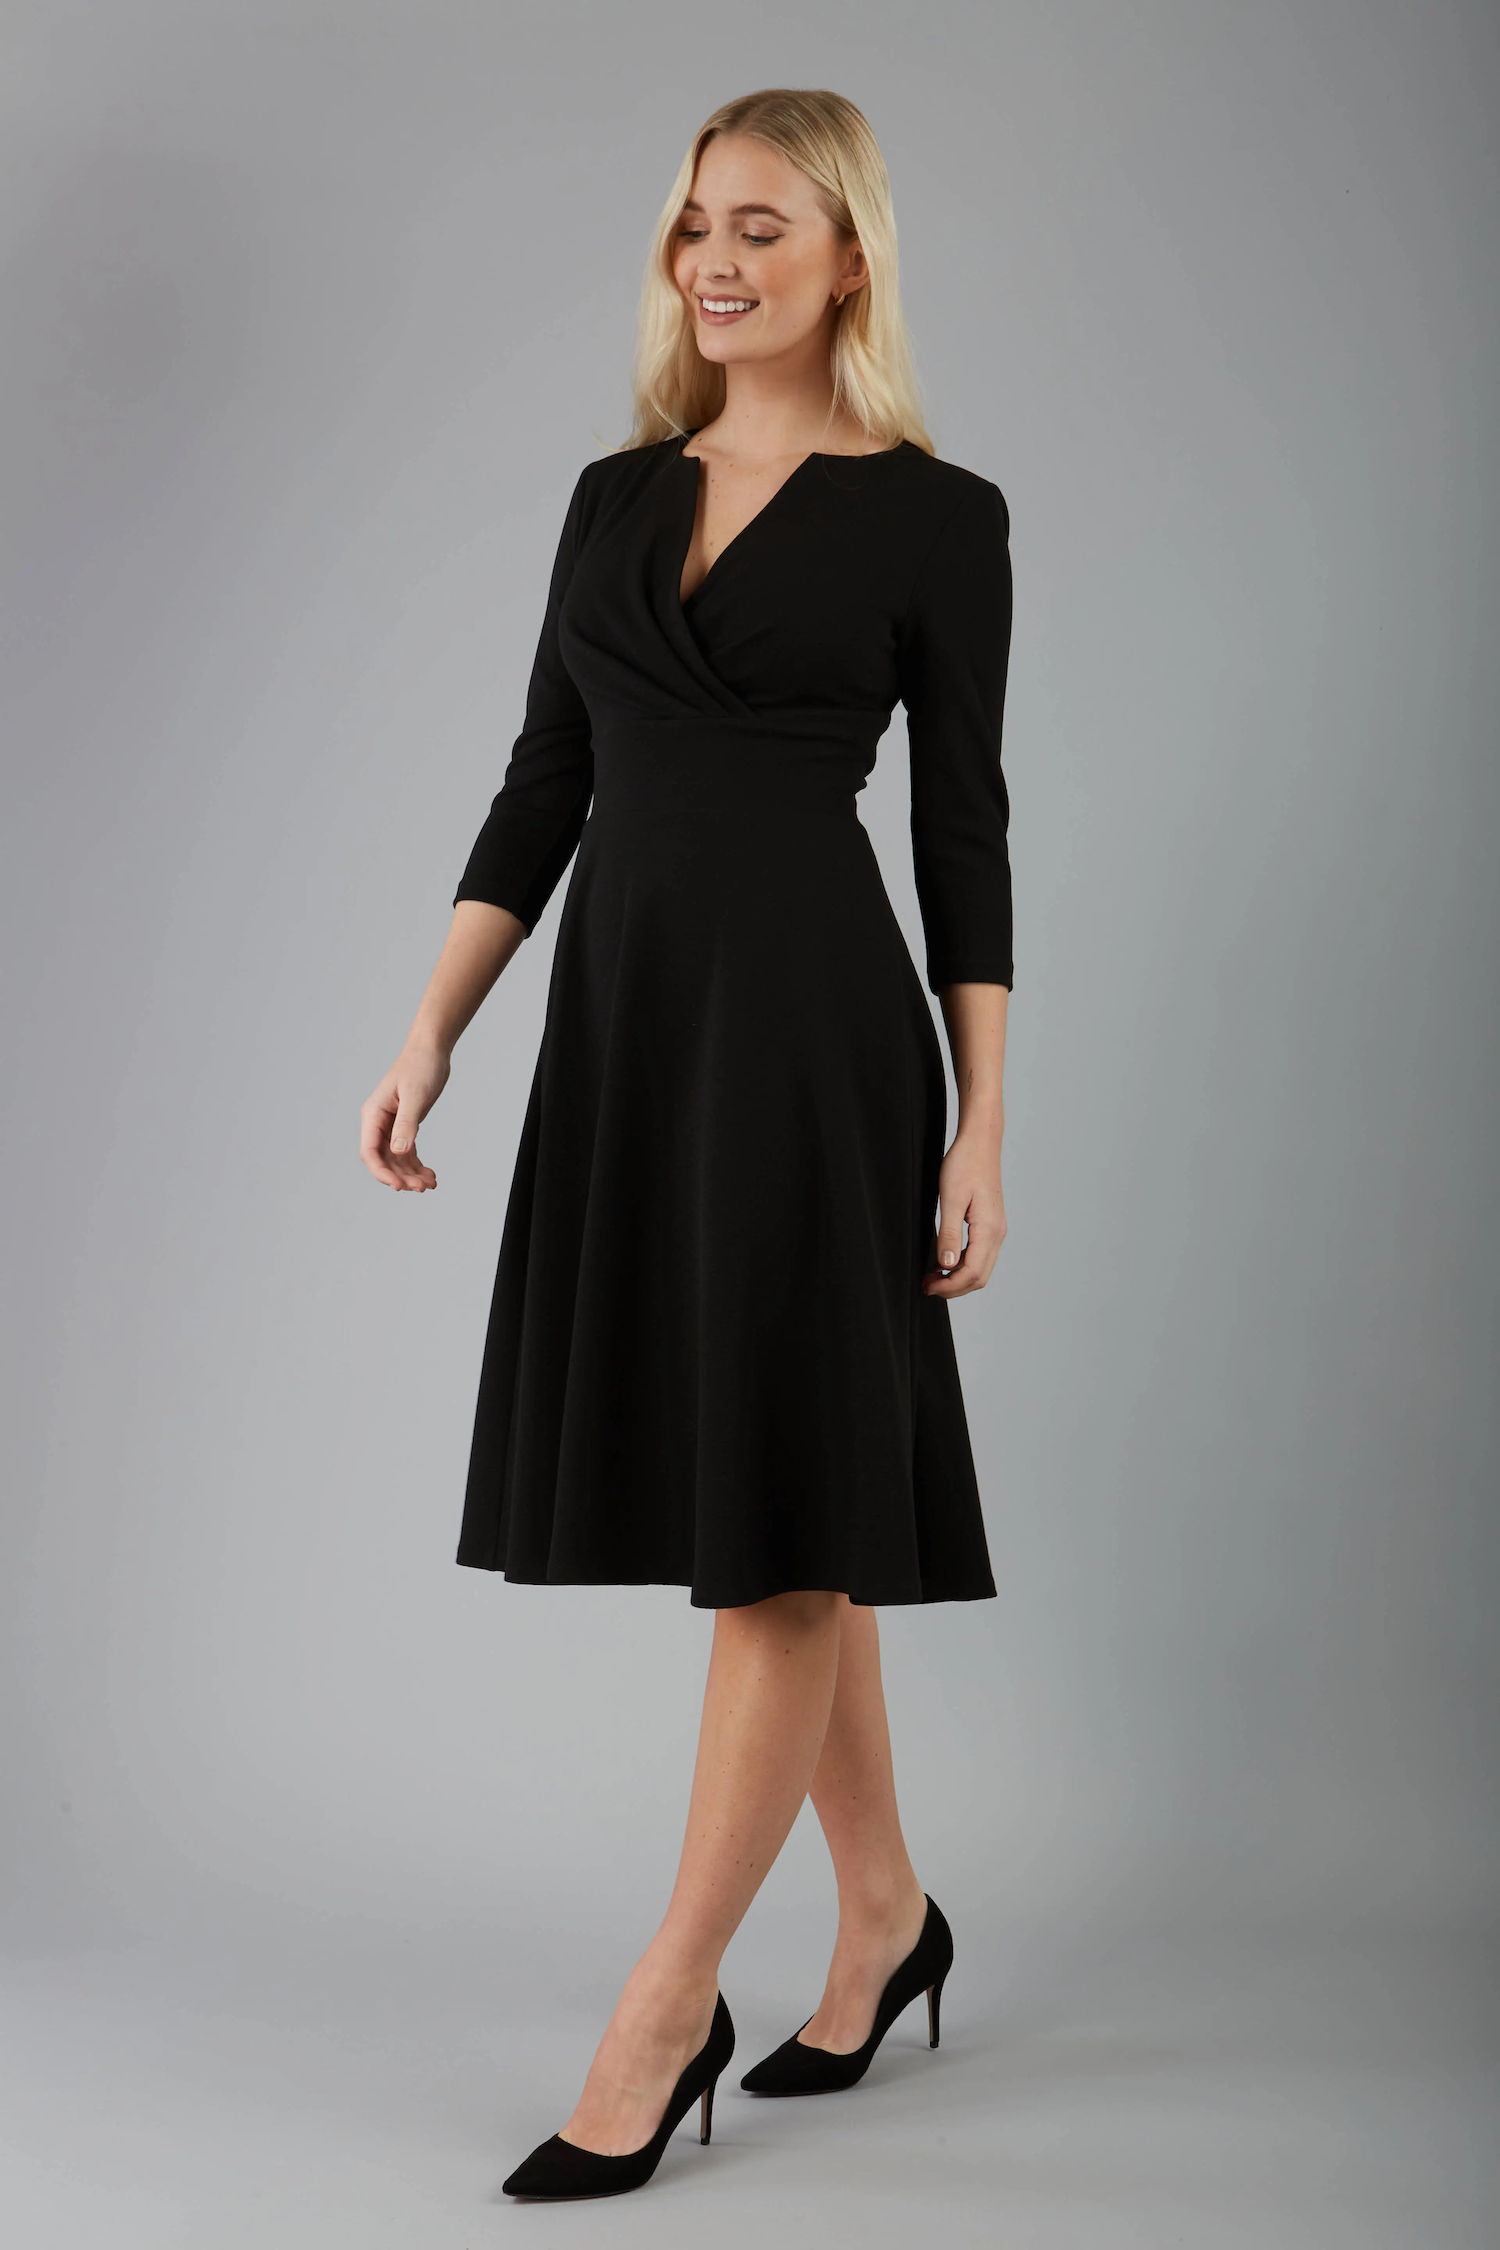 Women' Business January Dress - Black NORA GARDNER | OFFICIAL STORE for work and office